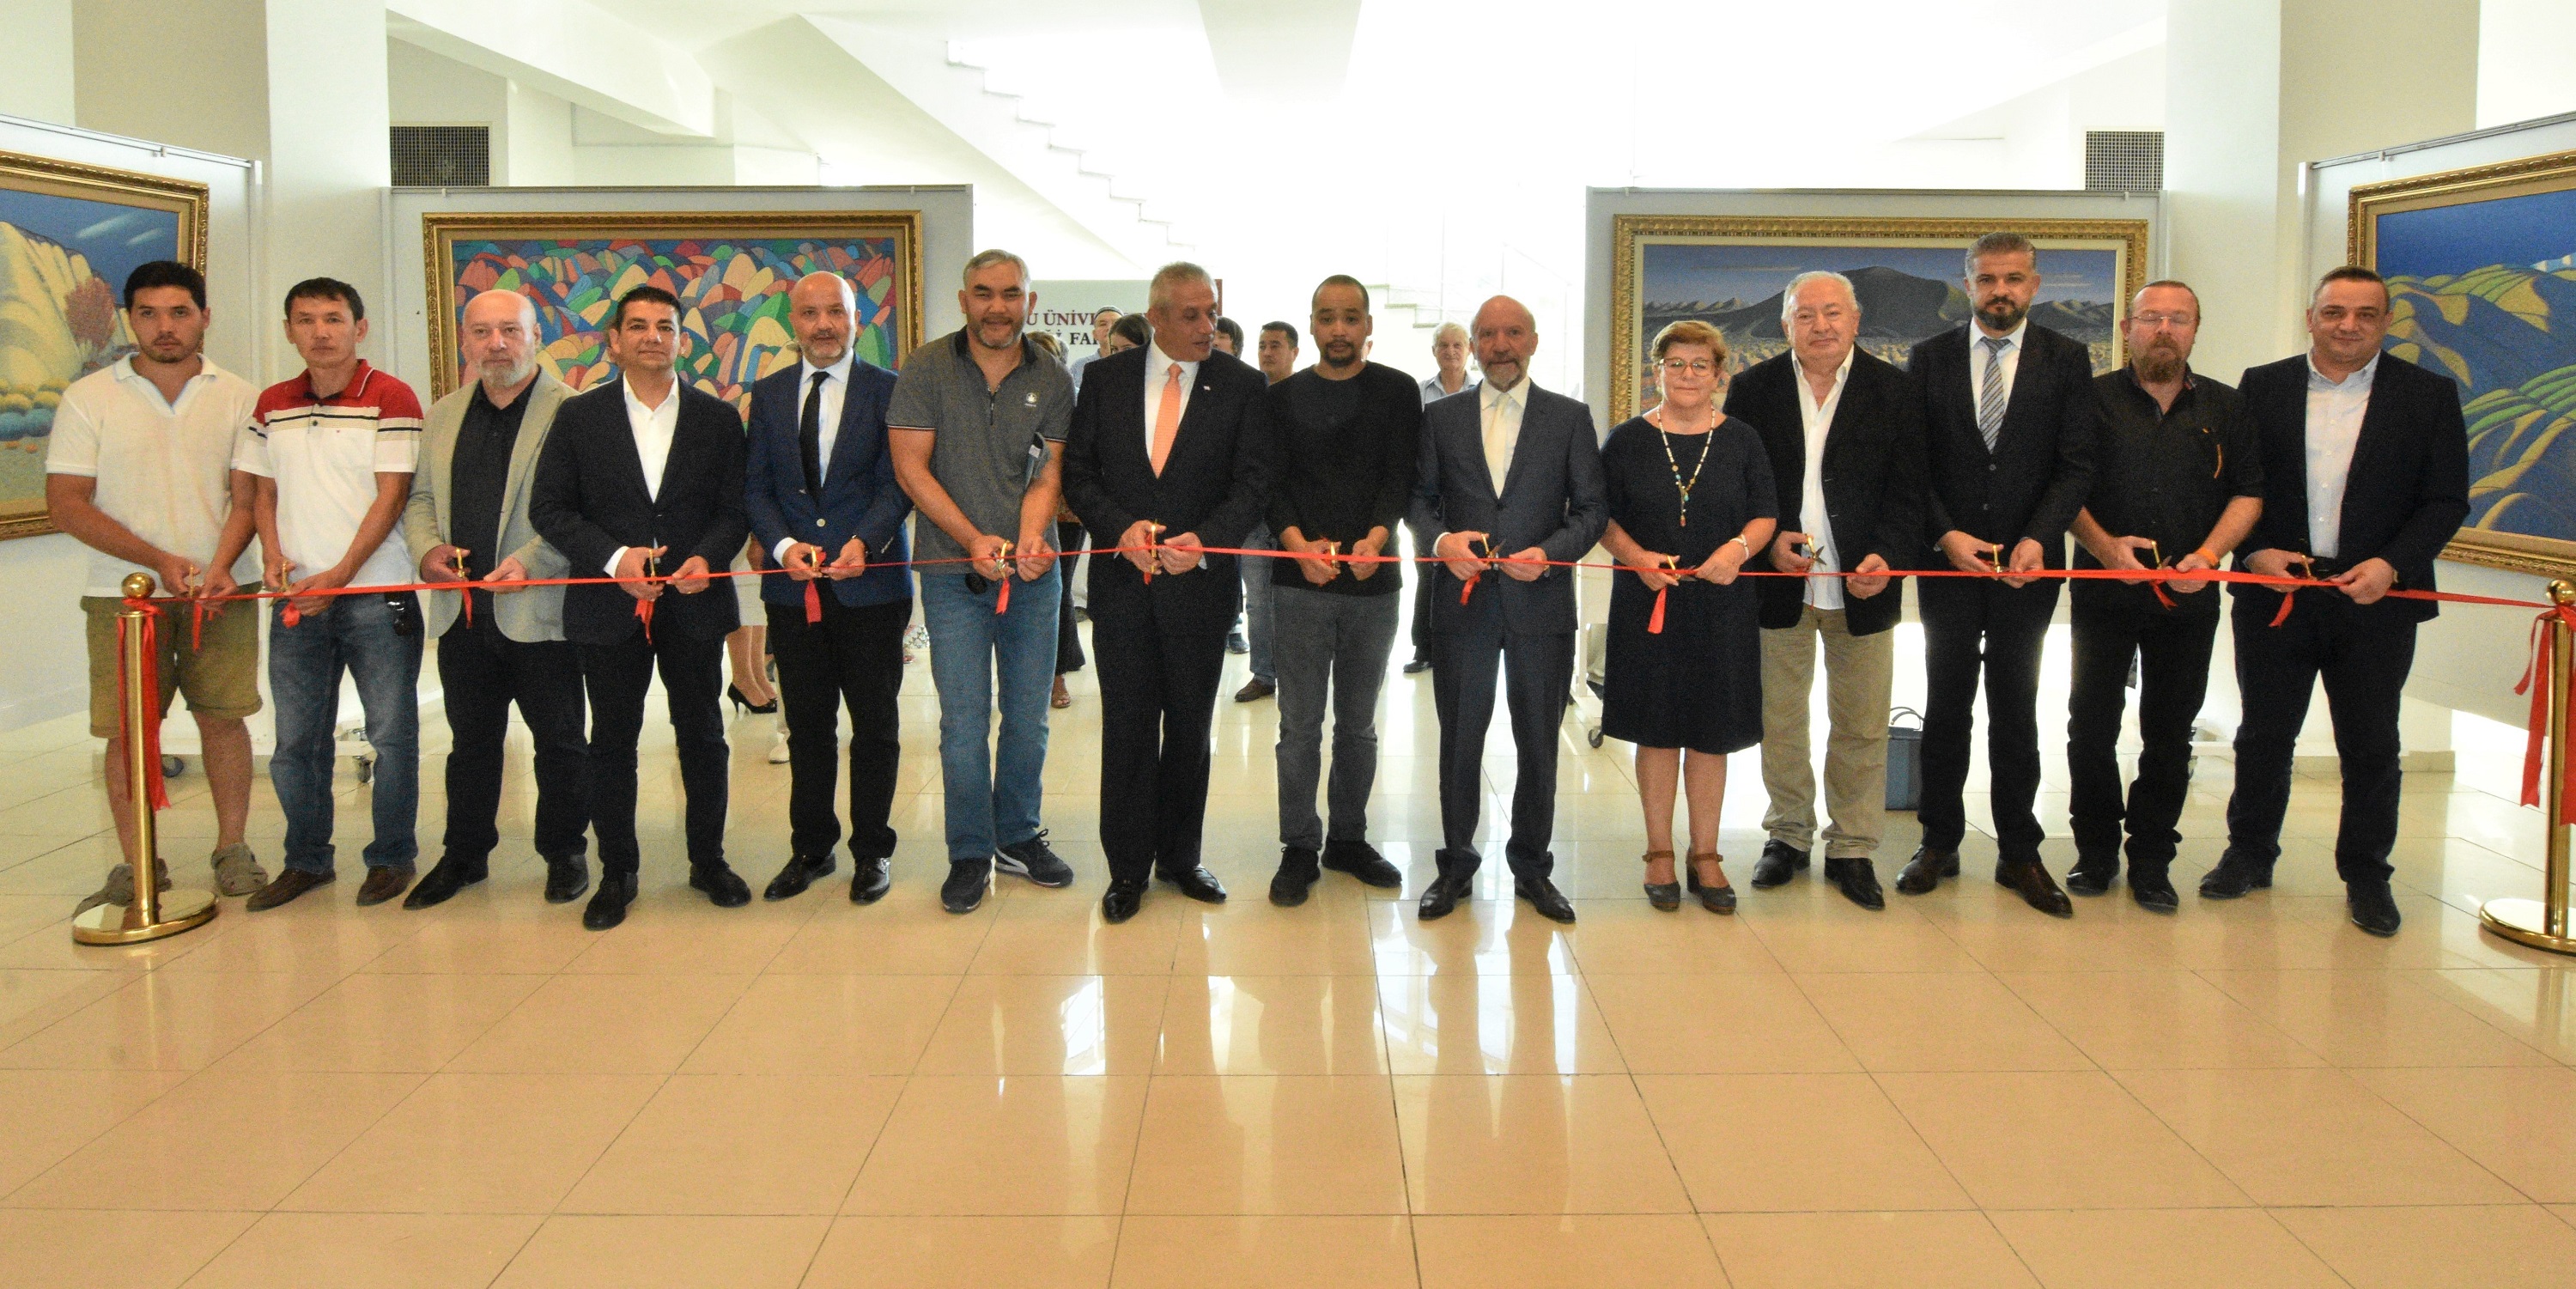 The Exhibition Consisting of Artworks of recently deceased Painting Artist Dogduberk Nurgaziev, Owner of Kyrgyzstan State Order and Silver Key Honour Award of Cyprus Museum of Modern Arts has been opened by Minister of Economy and Energy Hasan Taçoy